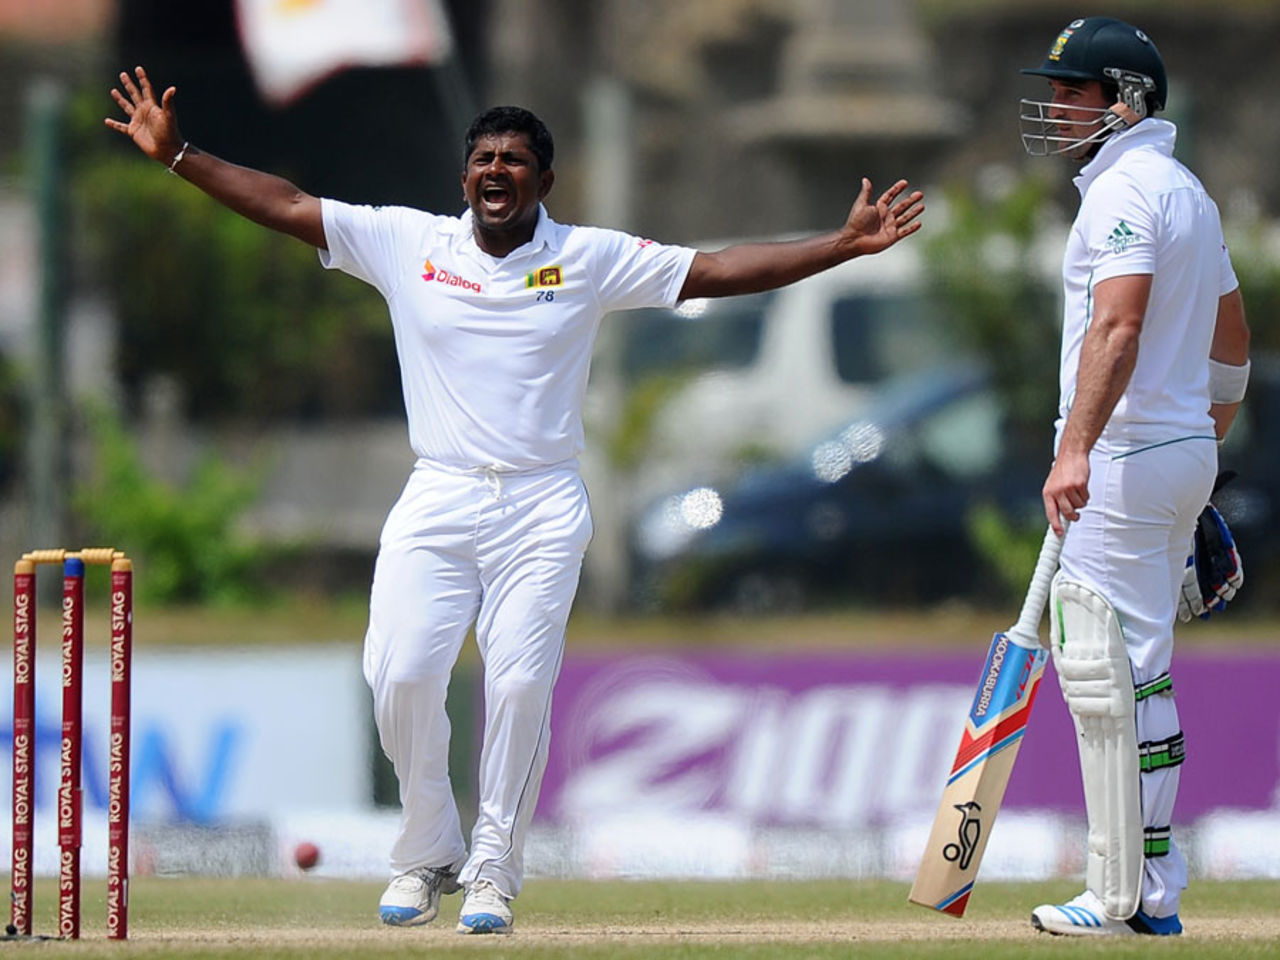 Rangana Herath appeals for an lbw, Sri Lanka v South Africa, 1st Test, Galle, 4th day, July 19, 2014